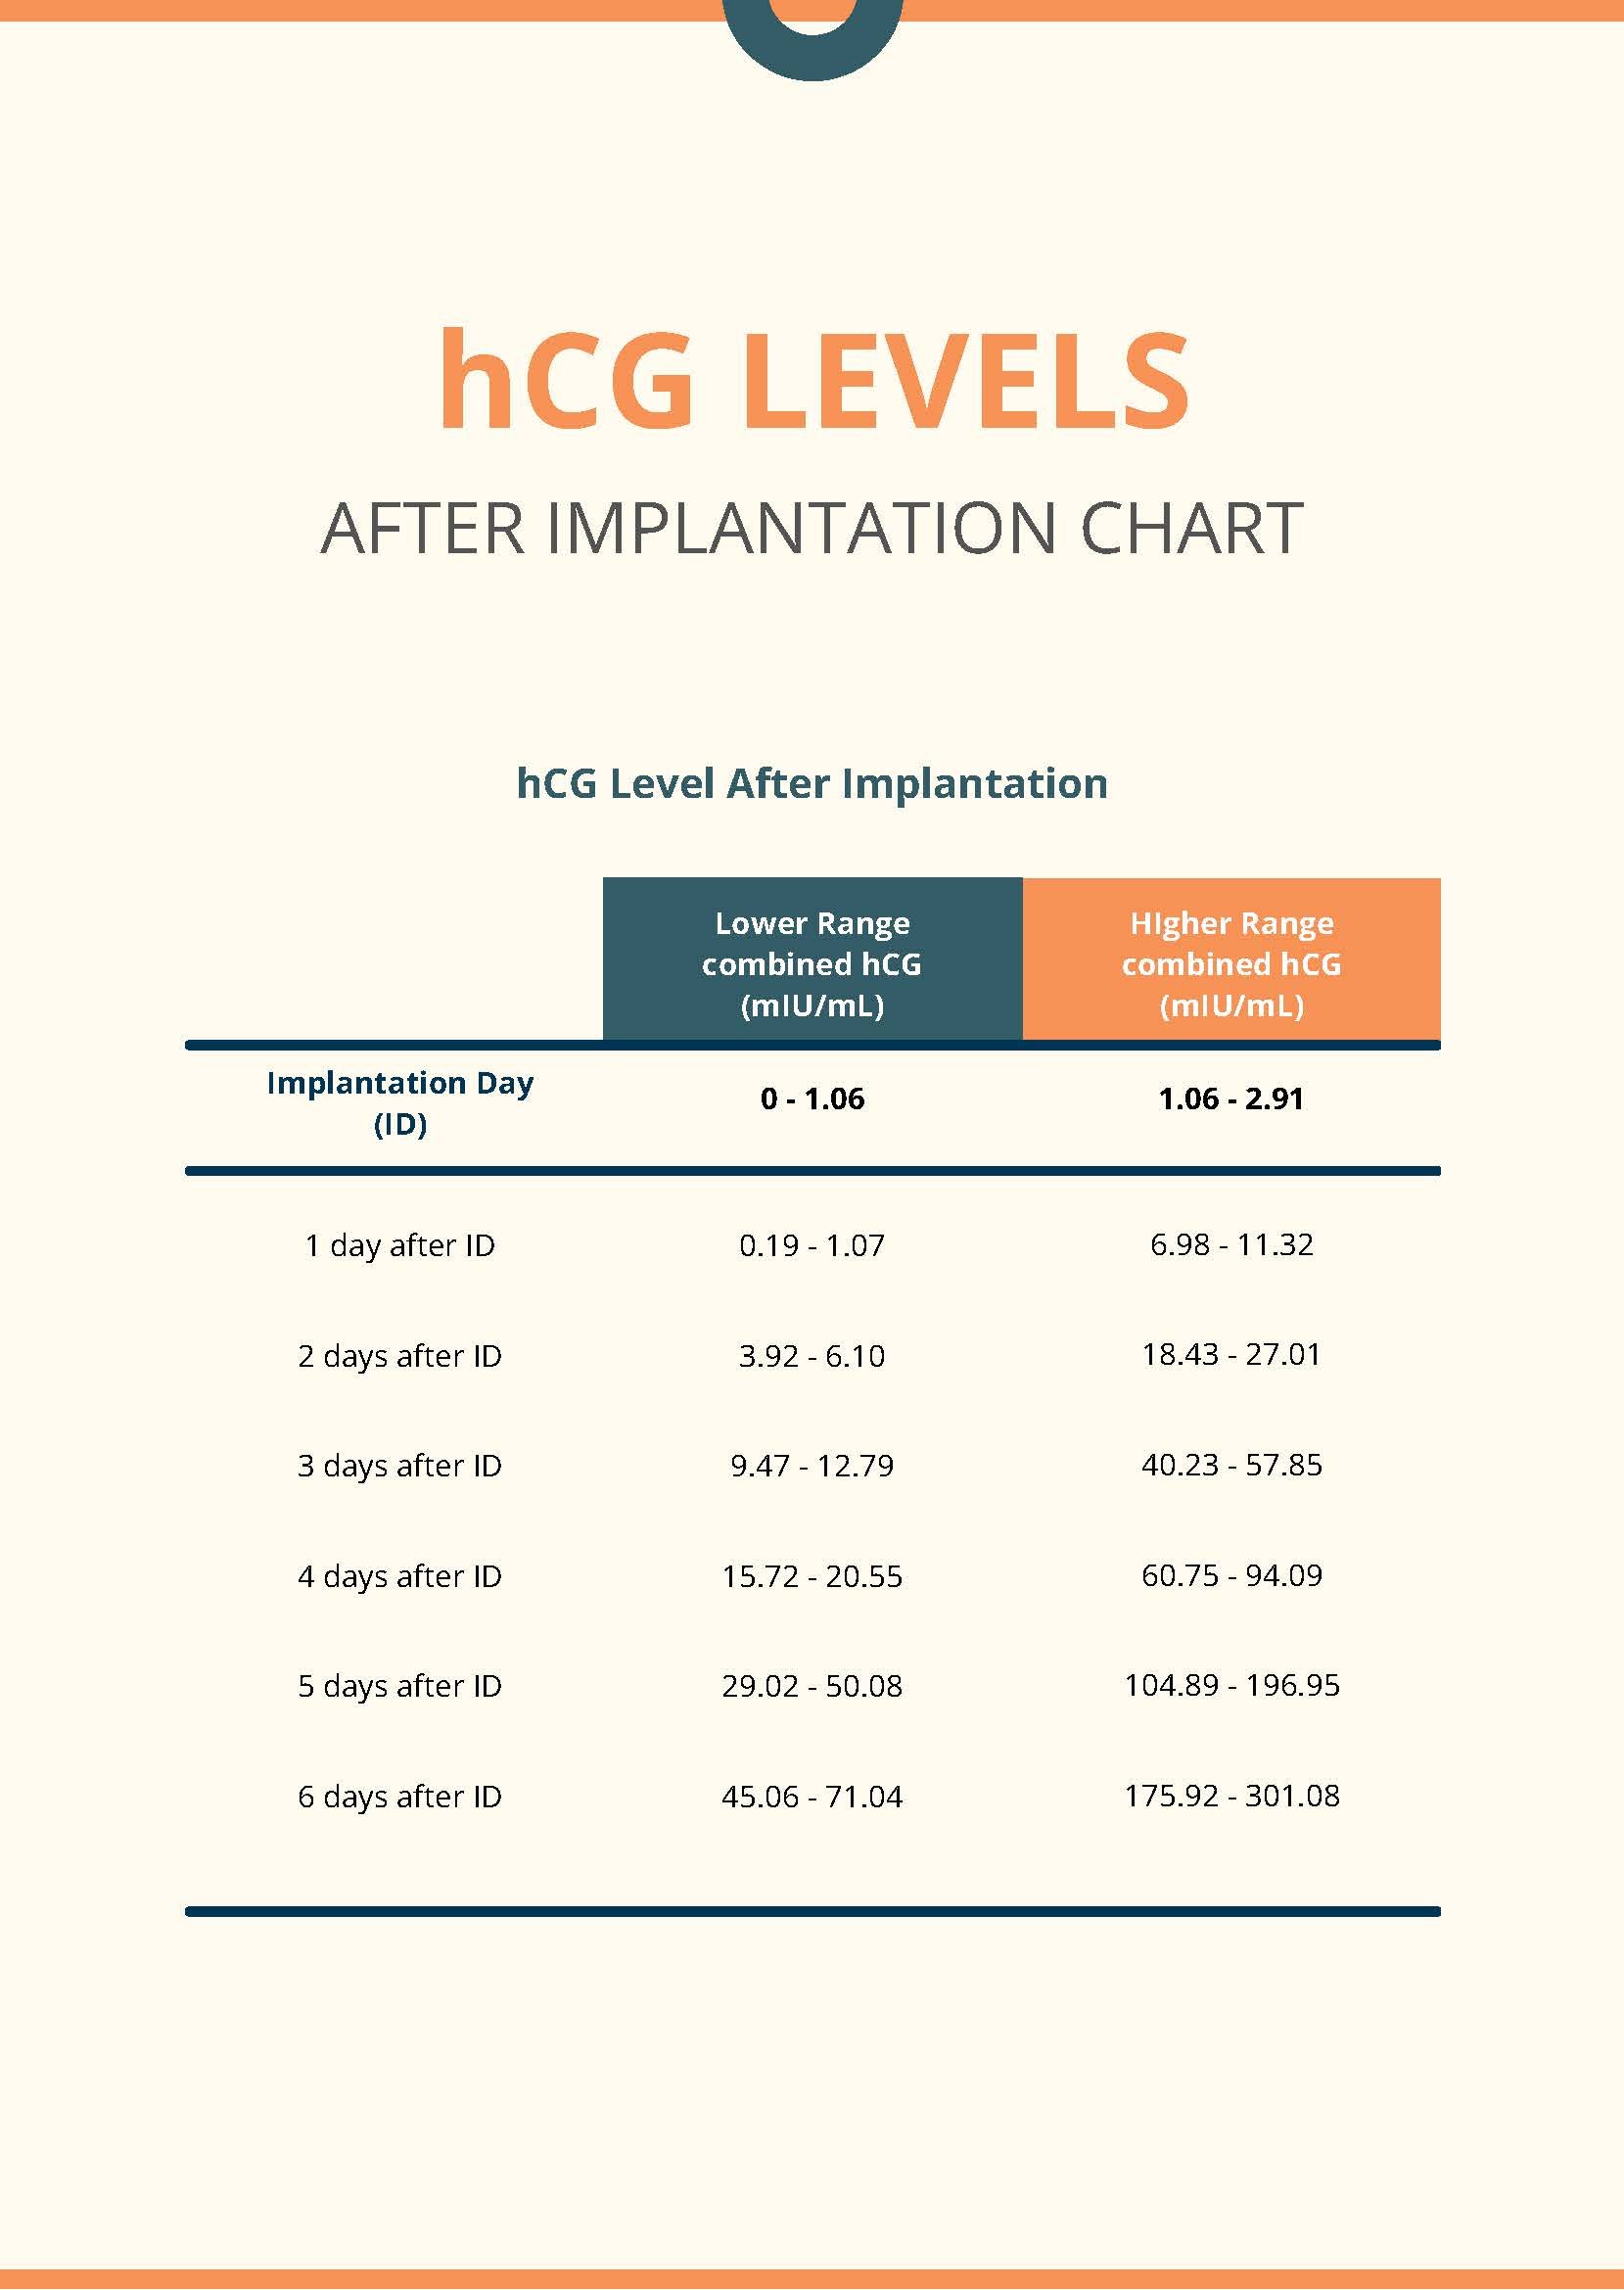 Free HCG Levels After Implantation Chart in PDF